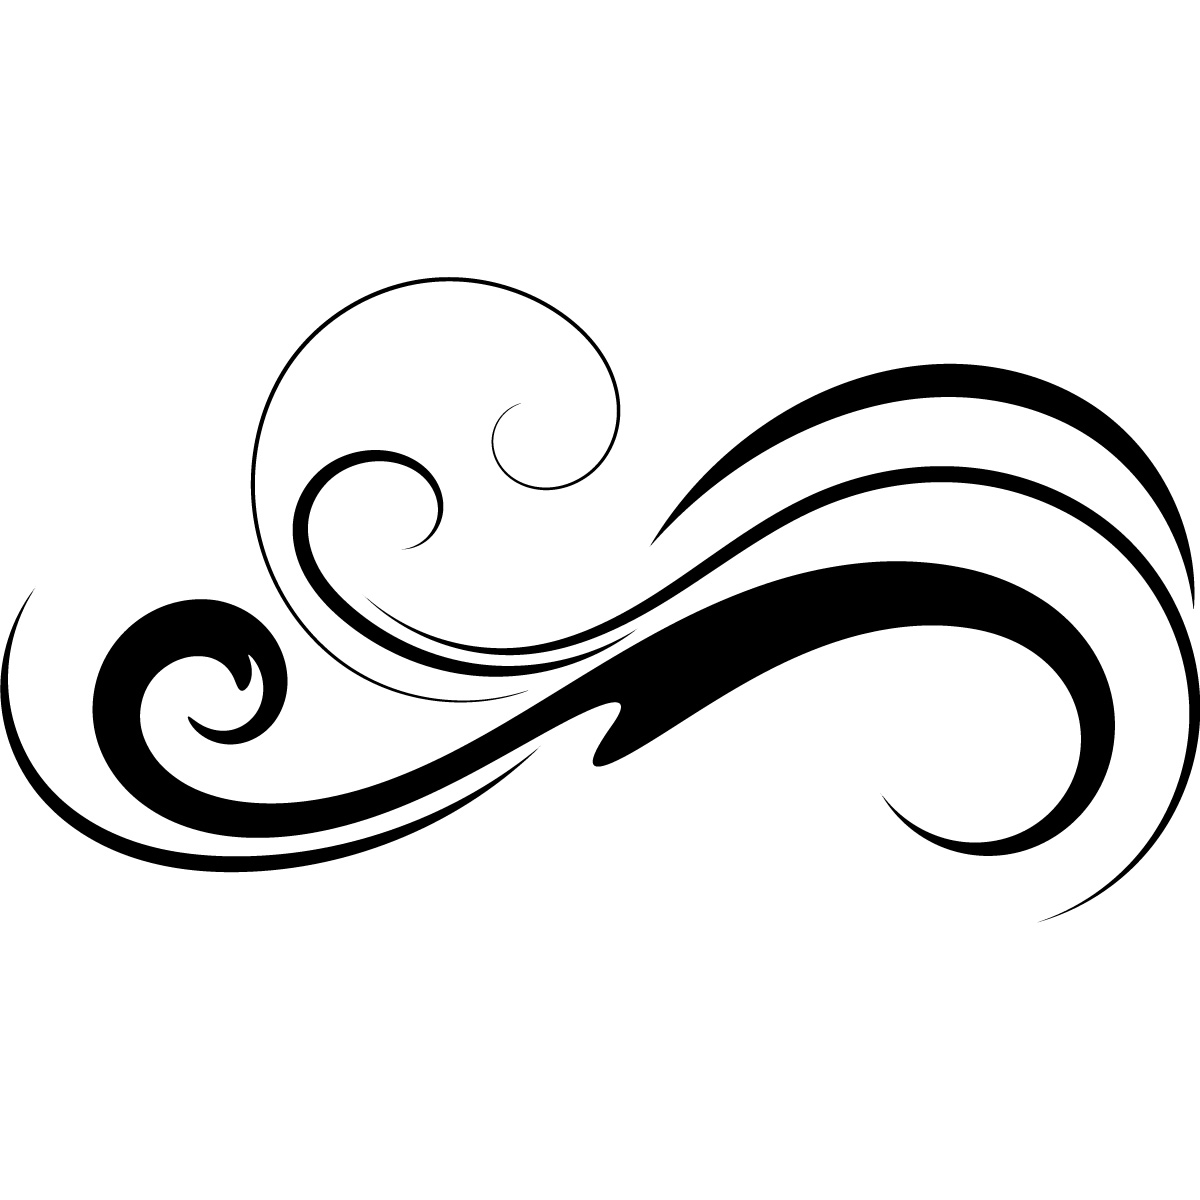 Line Drawing Of A Wave Free Cliparts That You Can Download To You